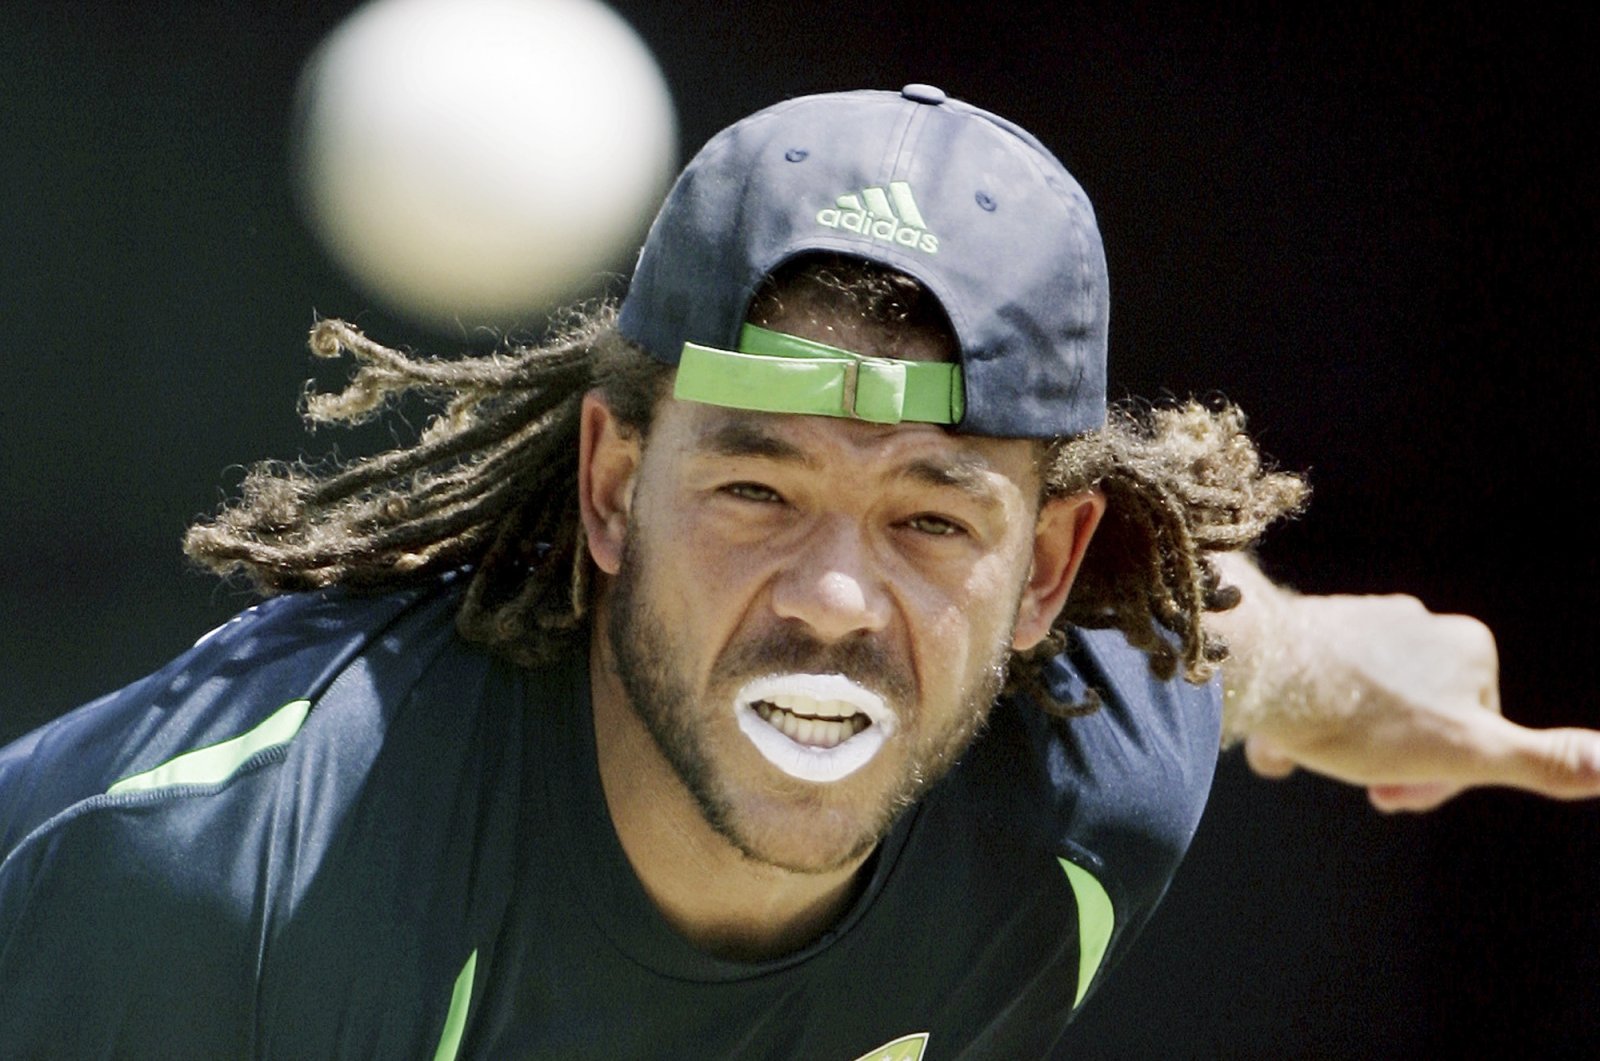 Australia&#039;s Andrew Symonds bowls in the nets during a training session, St. George&#039;s, Grenada, April 15, 2007. (AP Photo)